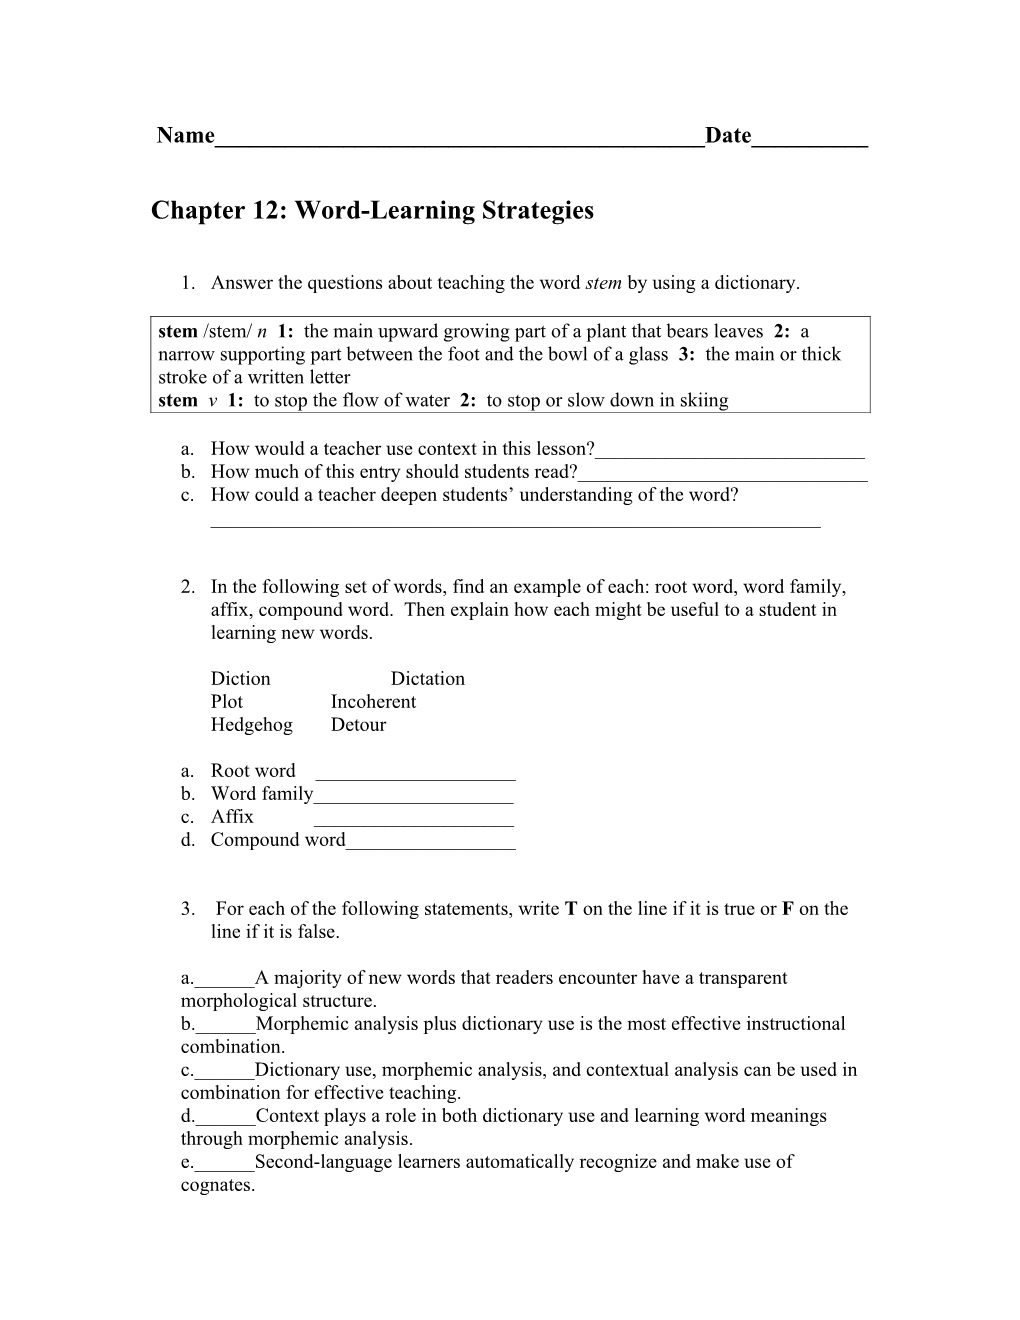 Chapter 12: Word-Learning Strategies